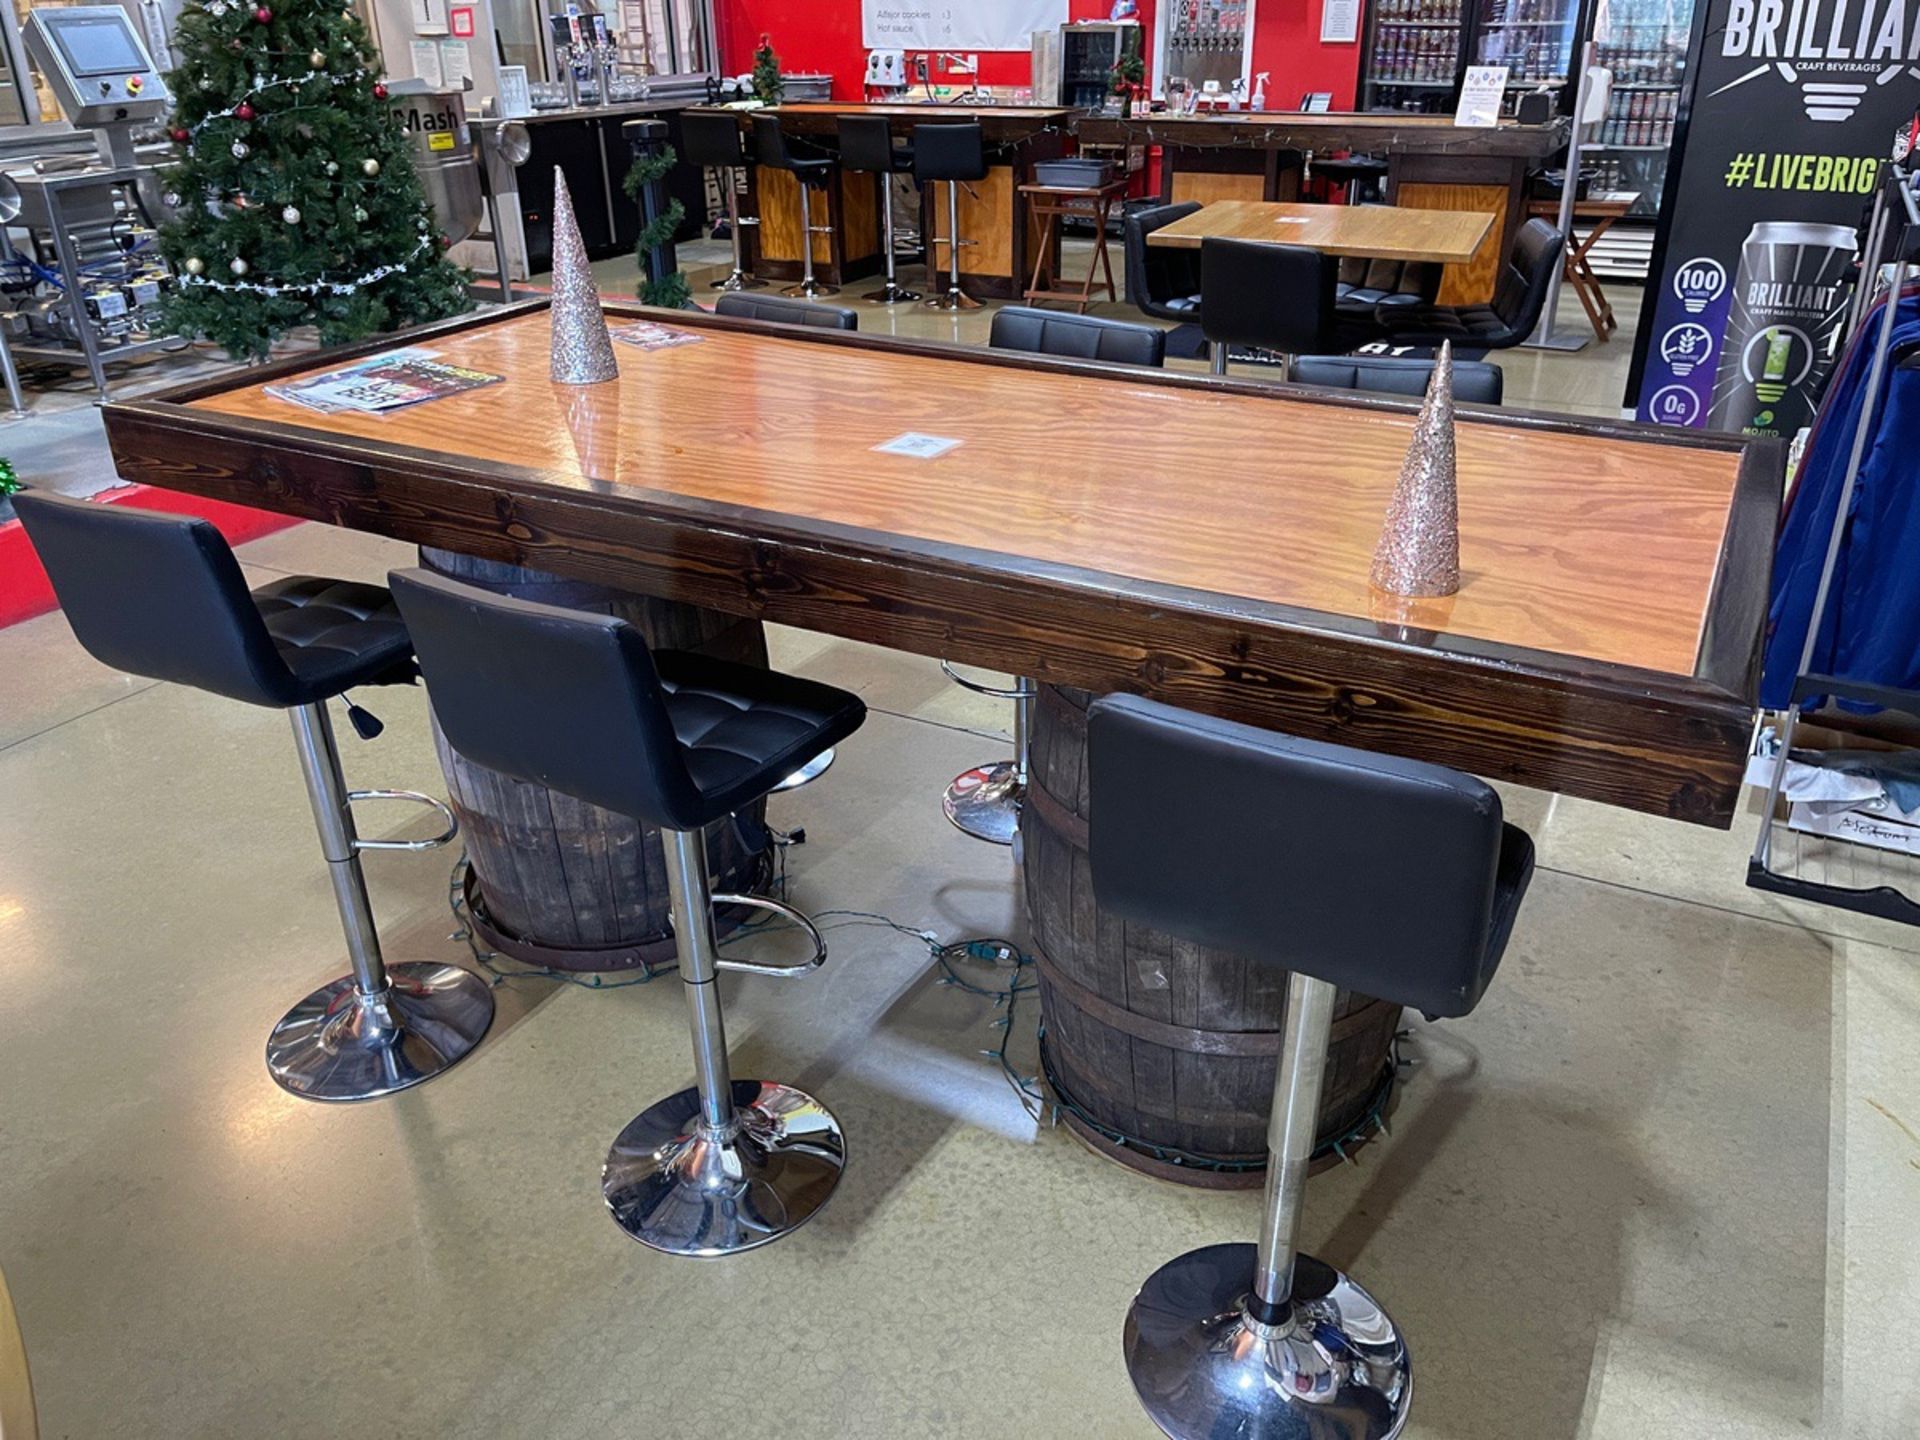 Wooden High Top Table on Barrel Pedestals with (6) Adjustable Bar Stools - 42"" x 98 | Rig Fee $200